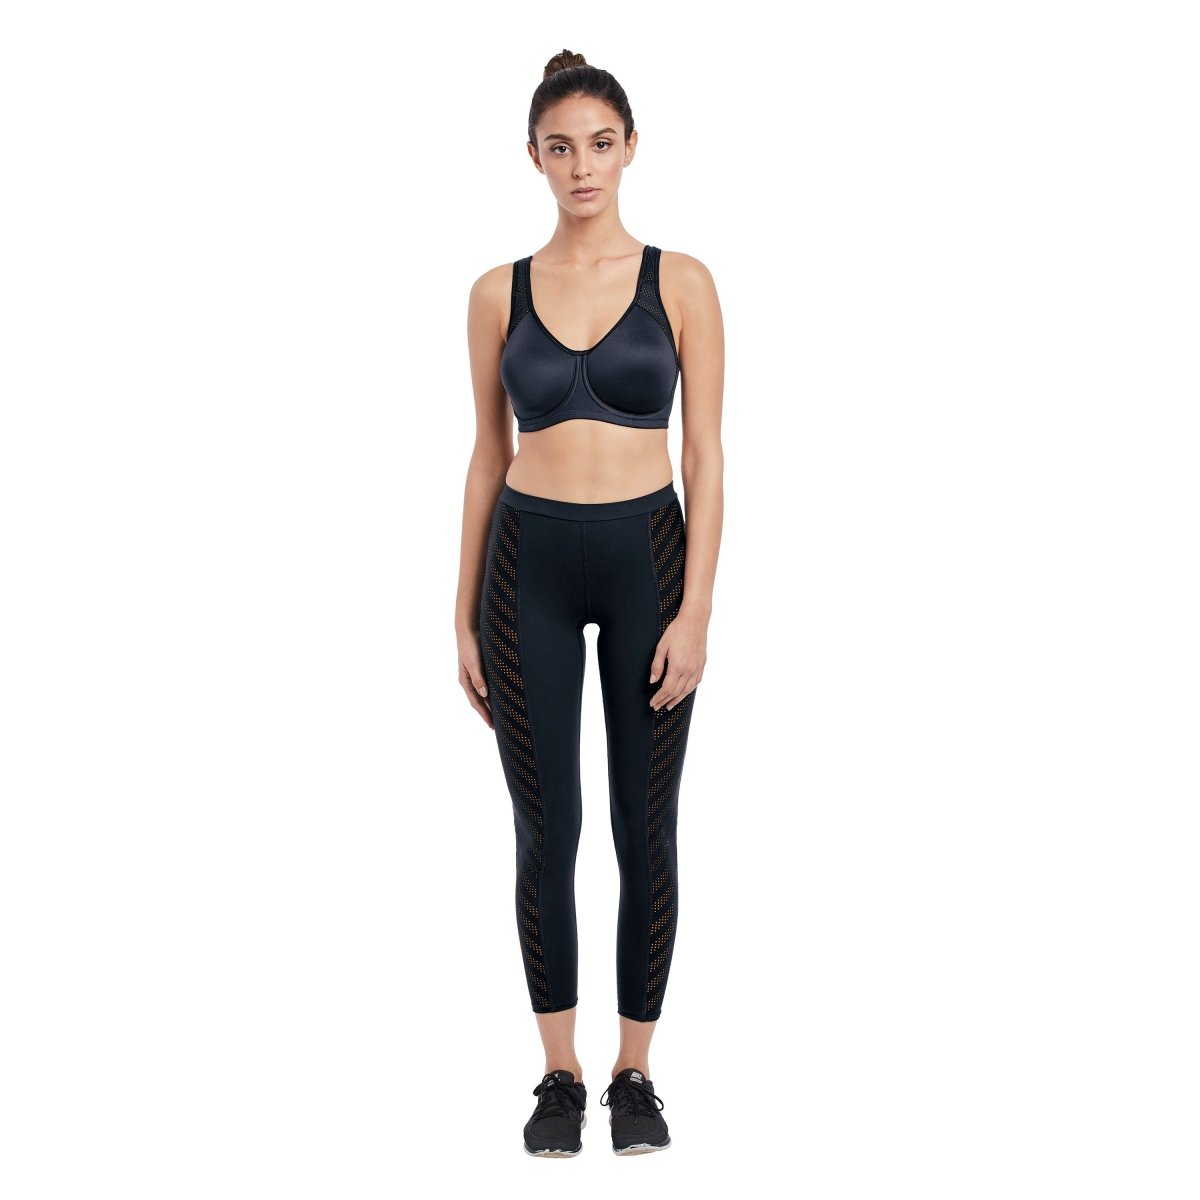 SONIC STORM UW MOULDED SPACER SPORTS BRA